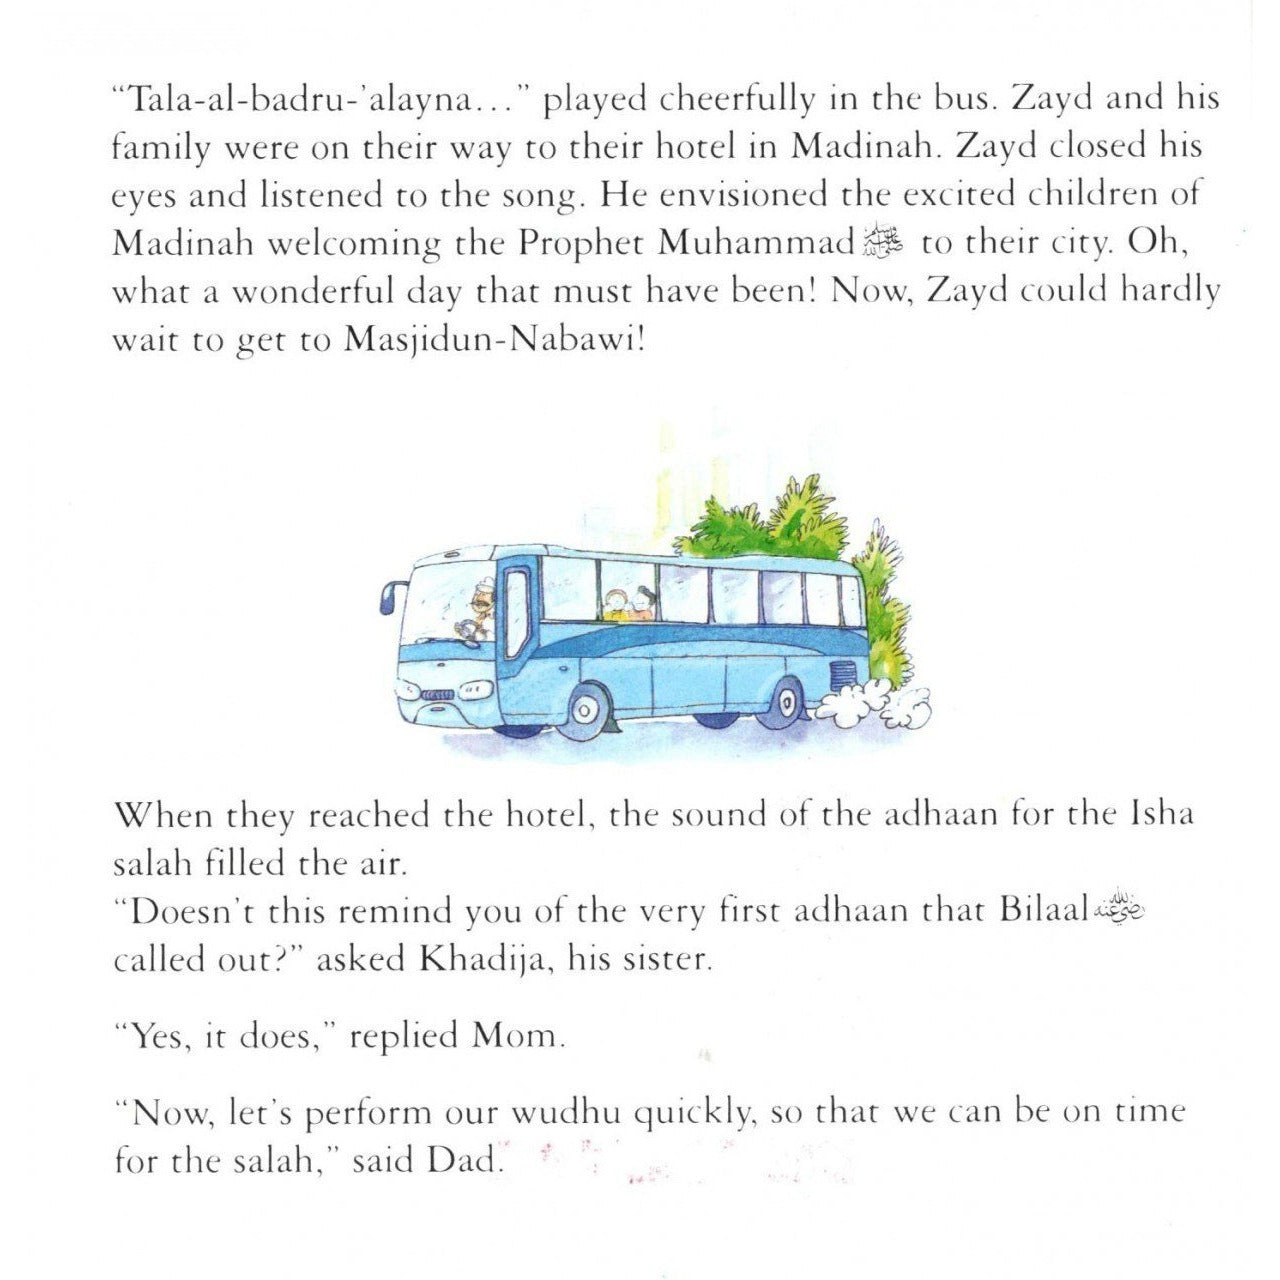 Zayd's Curious Little Stories: Set of 10 books